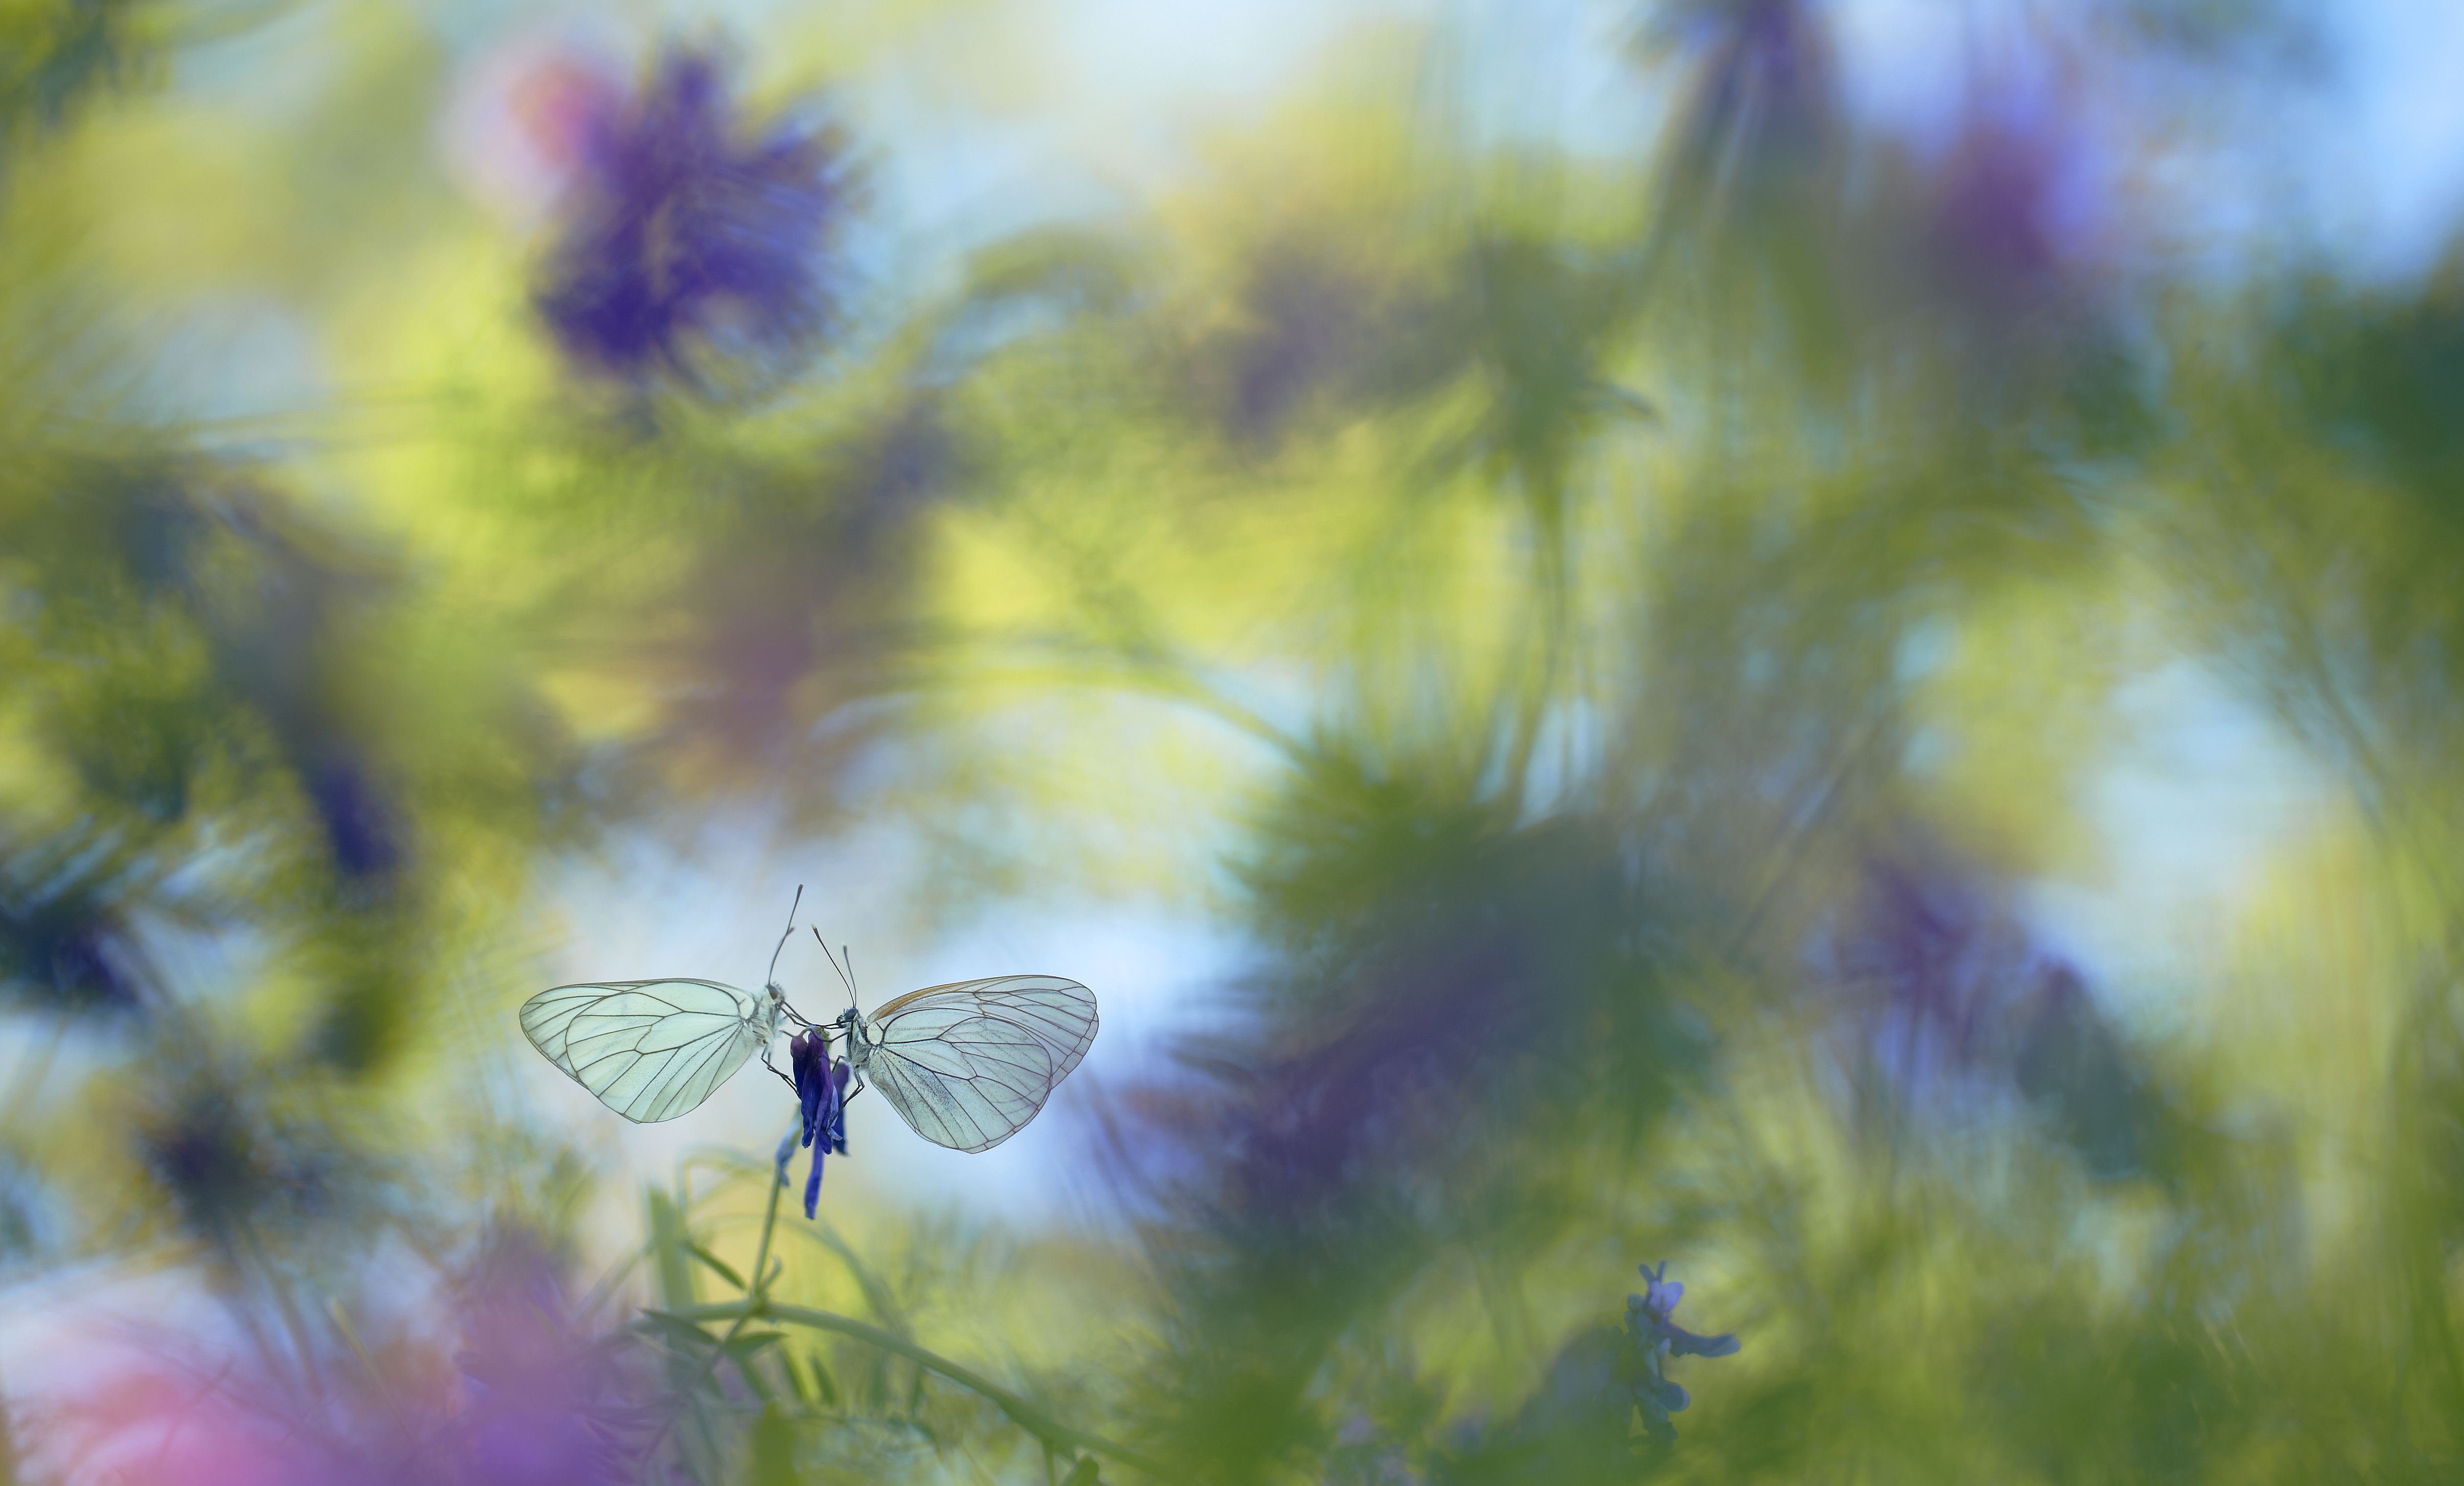 Wildlife Photographer of the Year 2015. Invertebrates, Finalist © Klaus Tamm (Germany) Wings of summer.